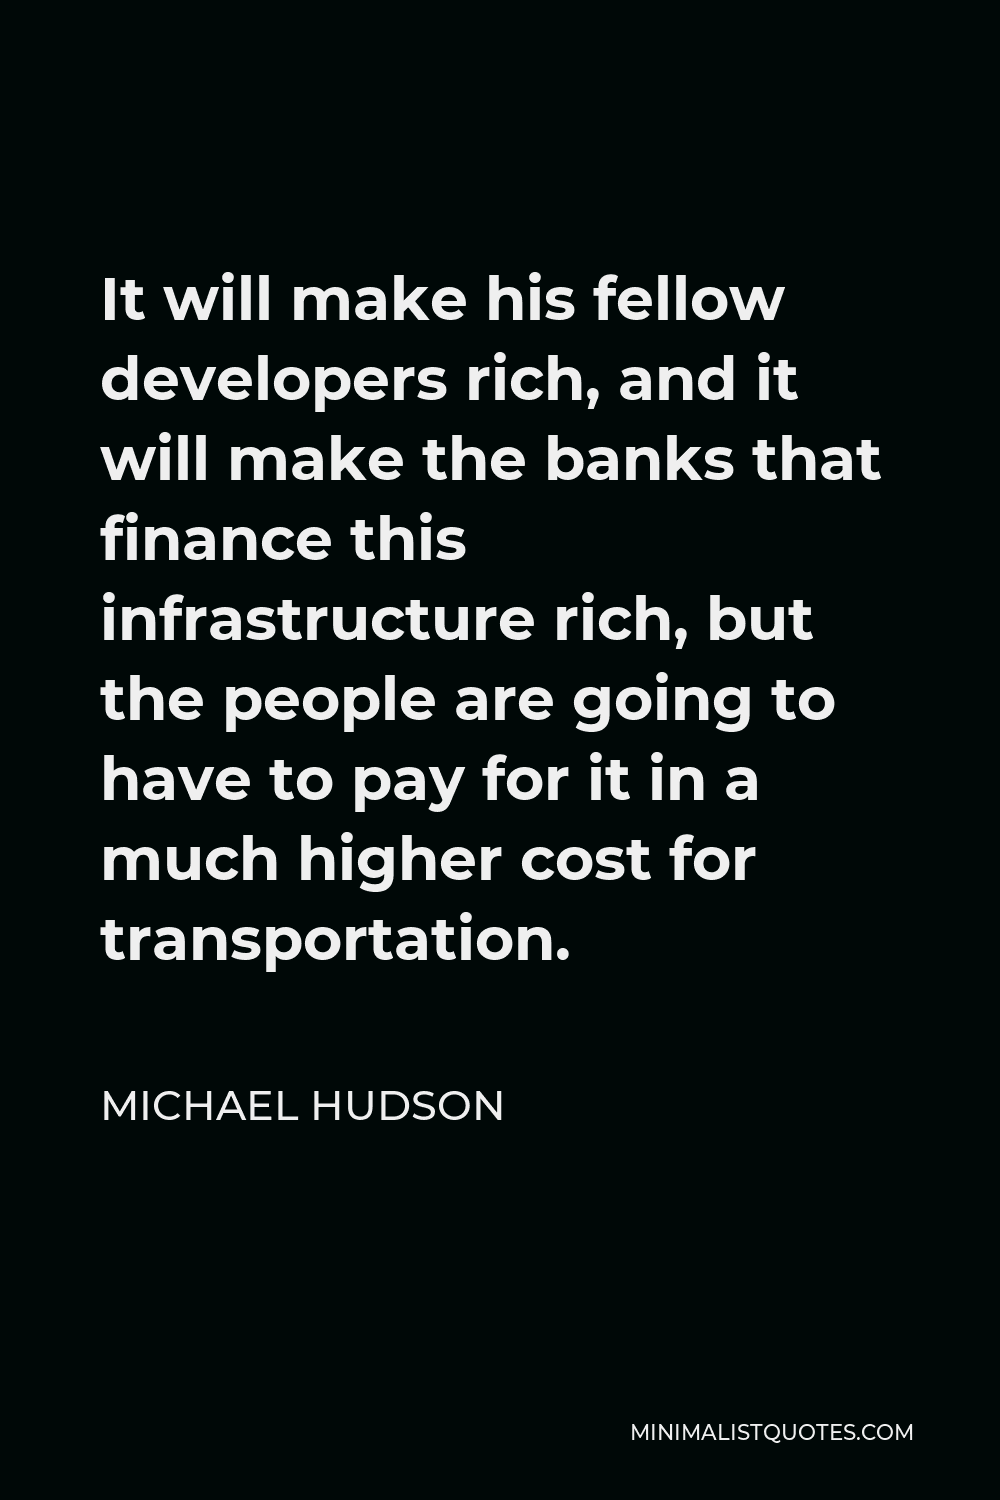 Michael Hudson Quote - It will make his fellow developers rich, and it will make the banks that finance this infrastructure rich, but the people are going to have to pay for it in a much higher cost for transportation.